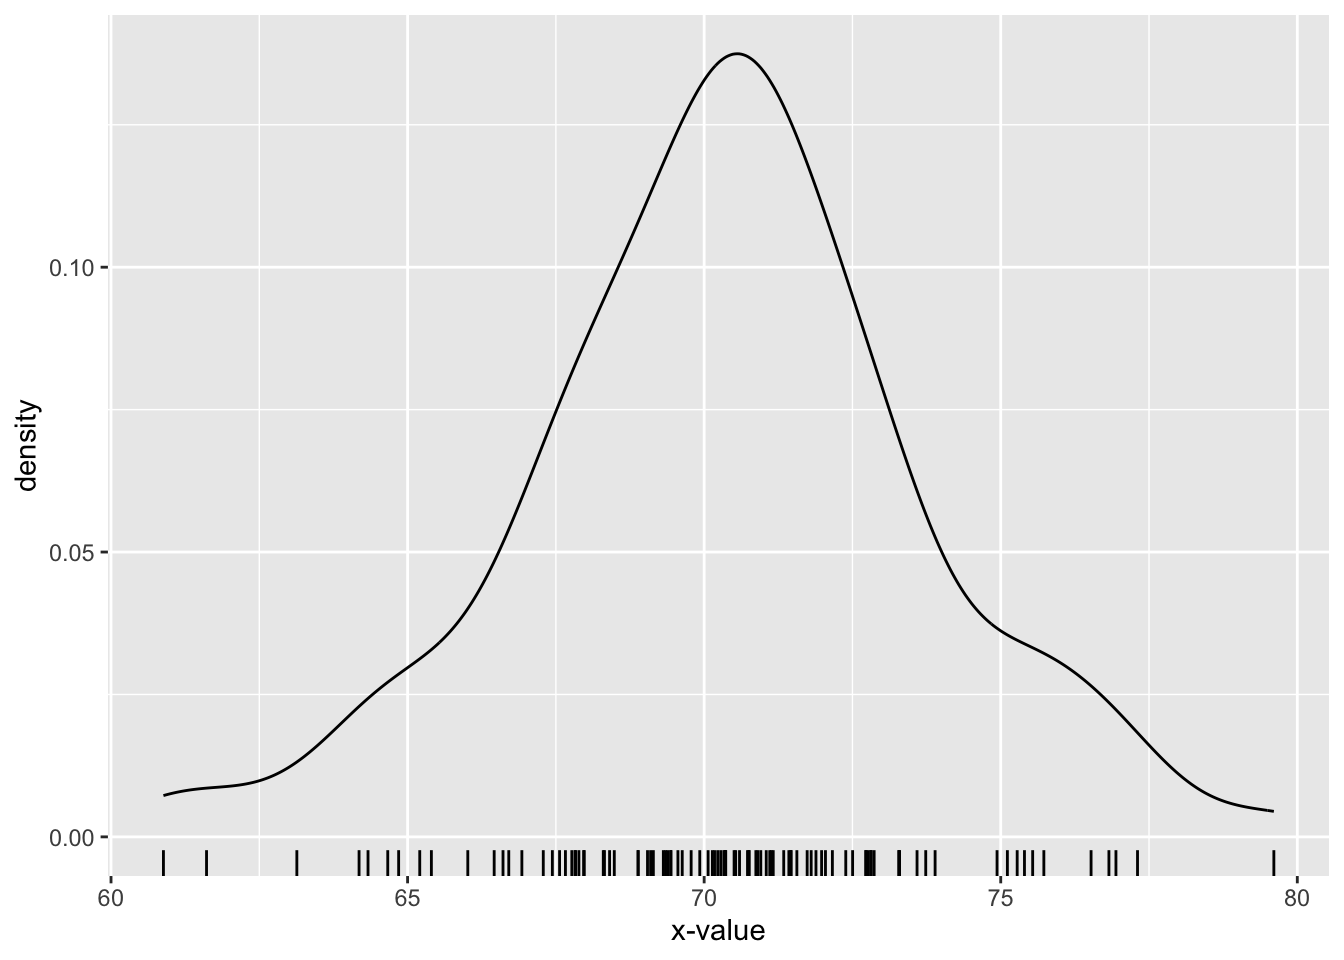 Density plot of 100 random values from a normal distribution with mean 70 and standard deviation 3.